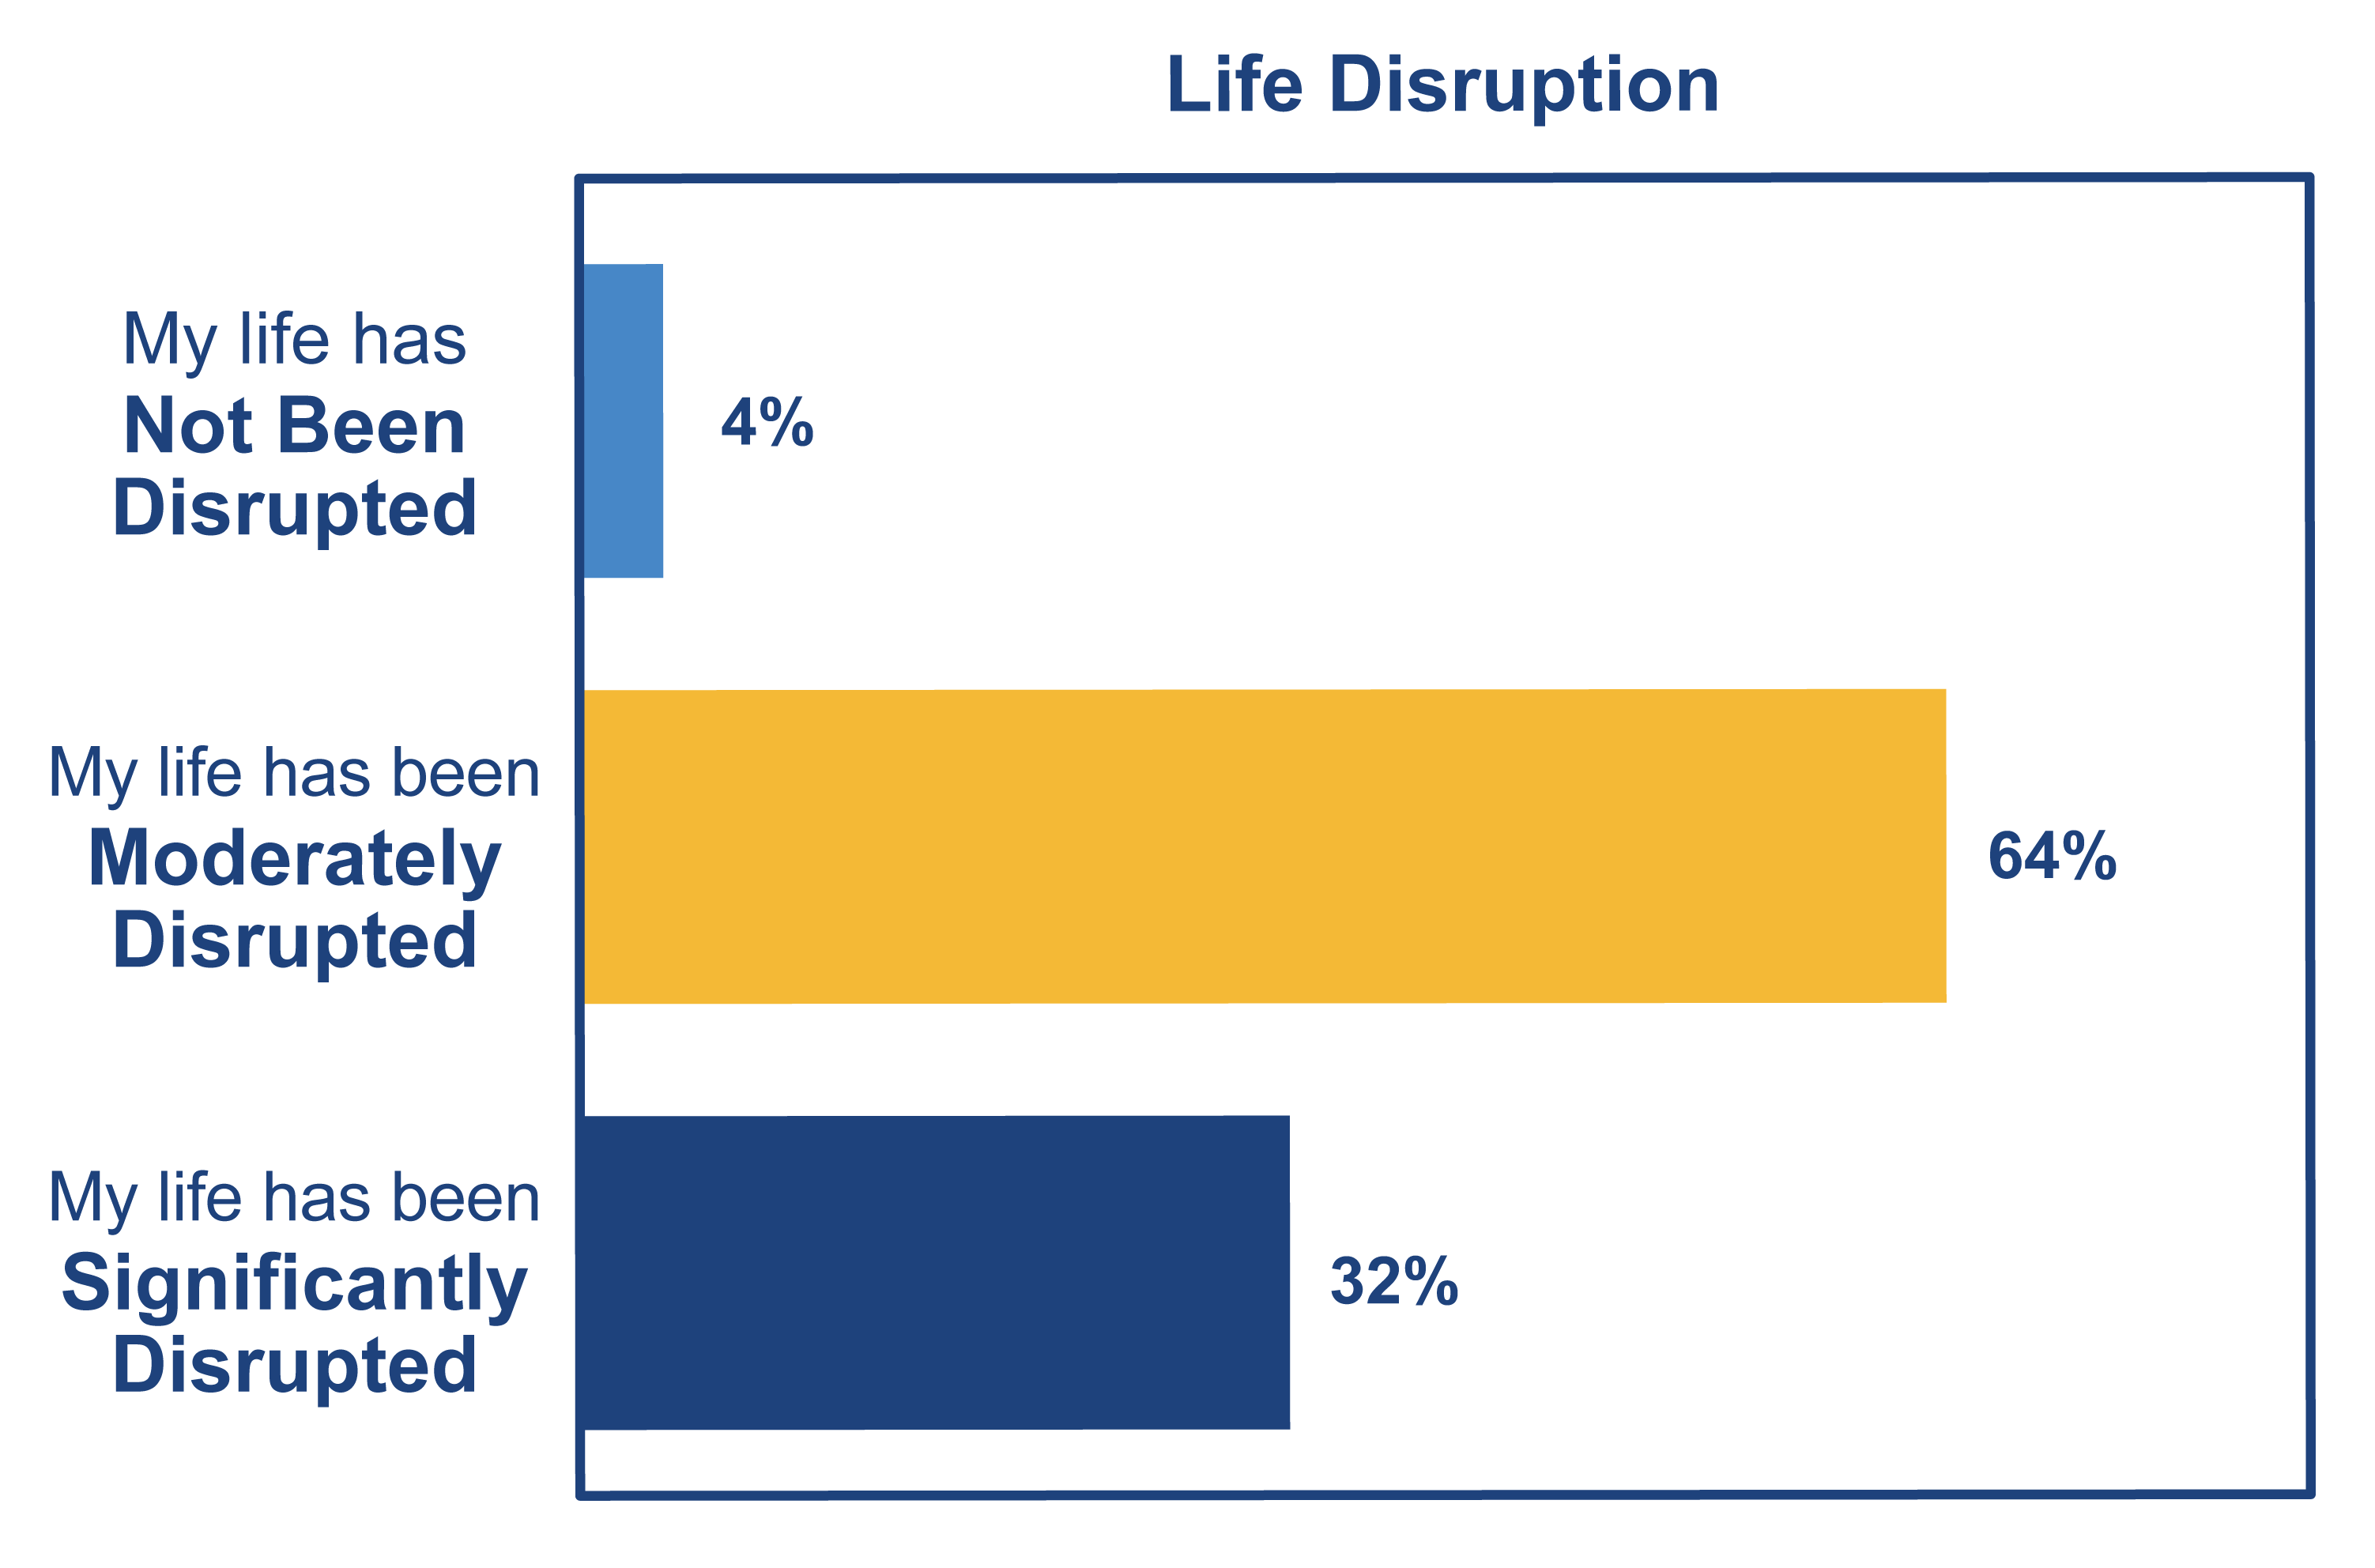 Bar chart showing, 32% significantly disrupted,  64% moderately disrupted, 4% not been disrupted.